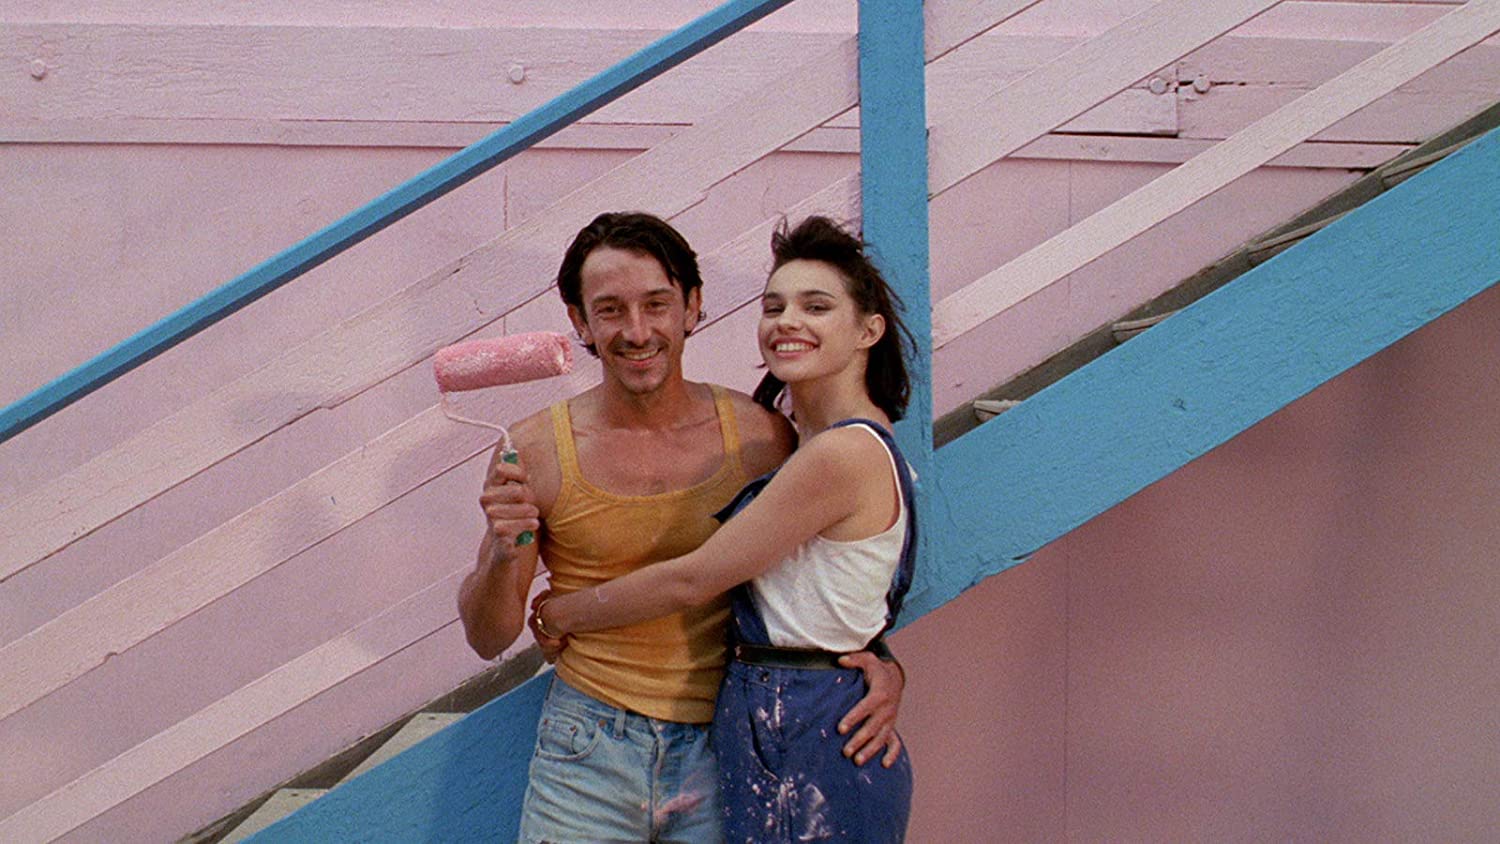 Blu Ray Review Criterion S Revealing BETTY BLUE